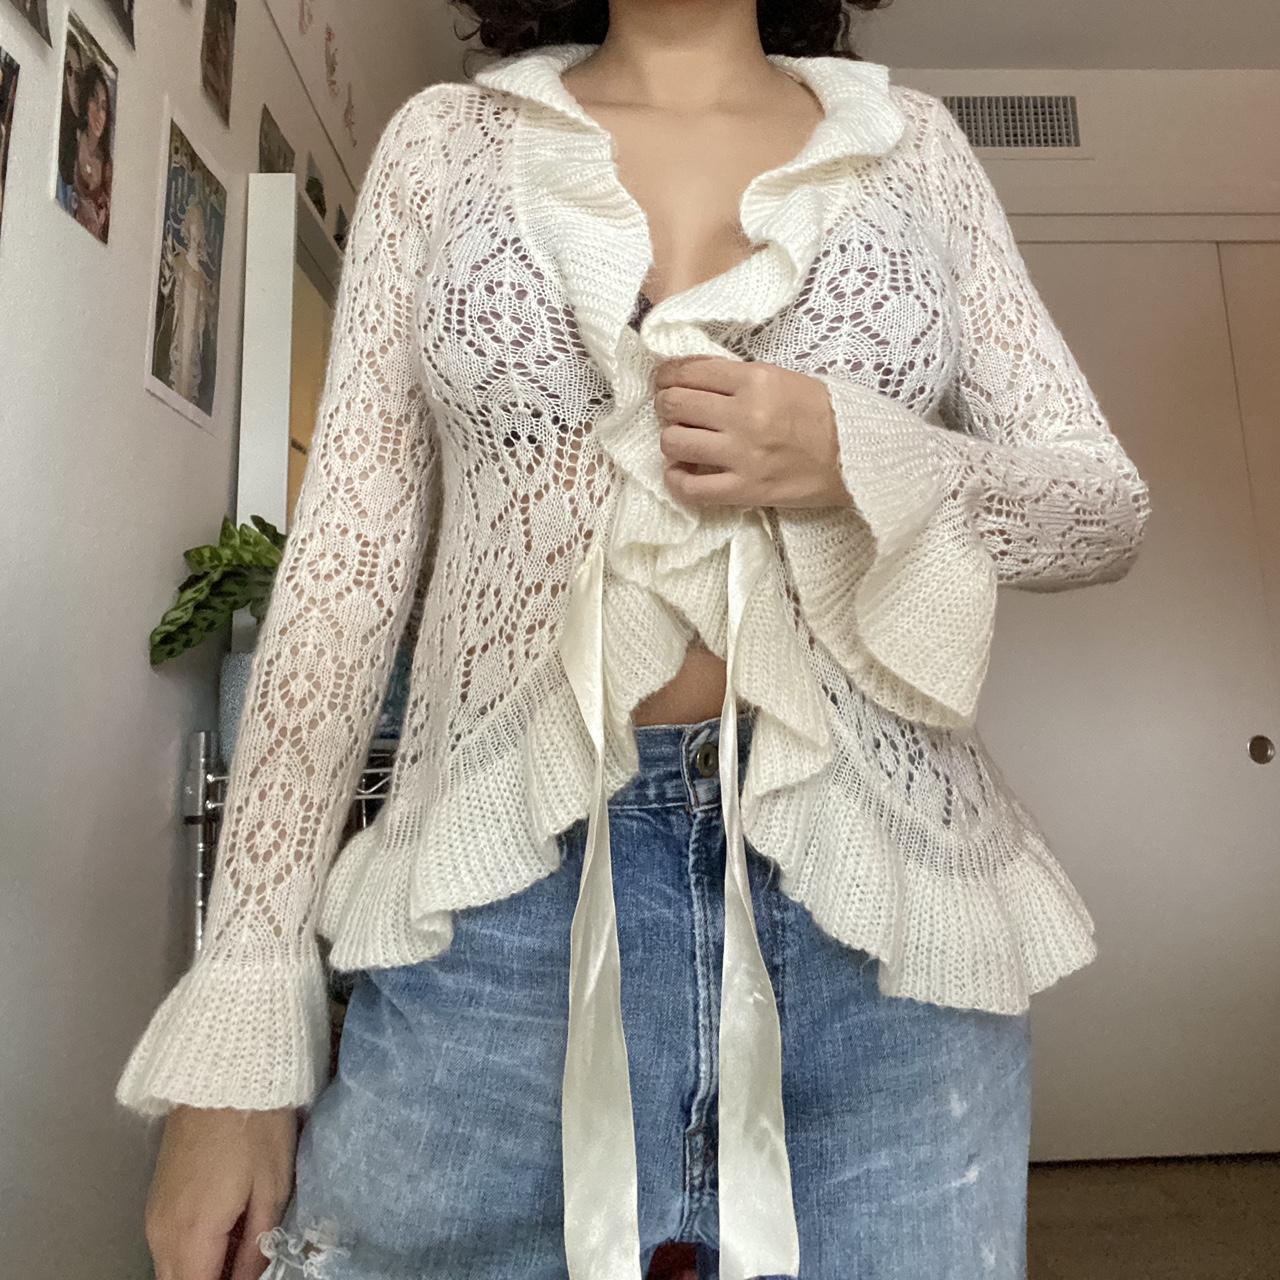 White cardigan with silk tie Great for layering - Depop